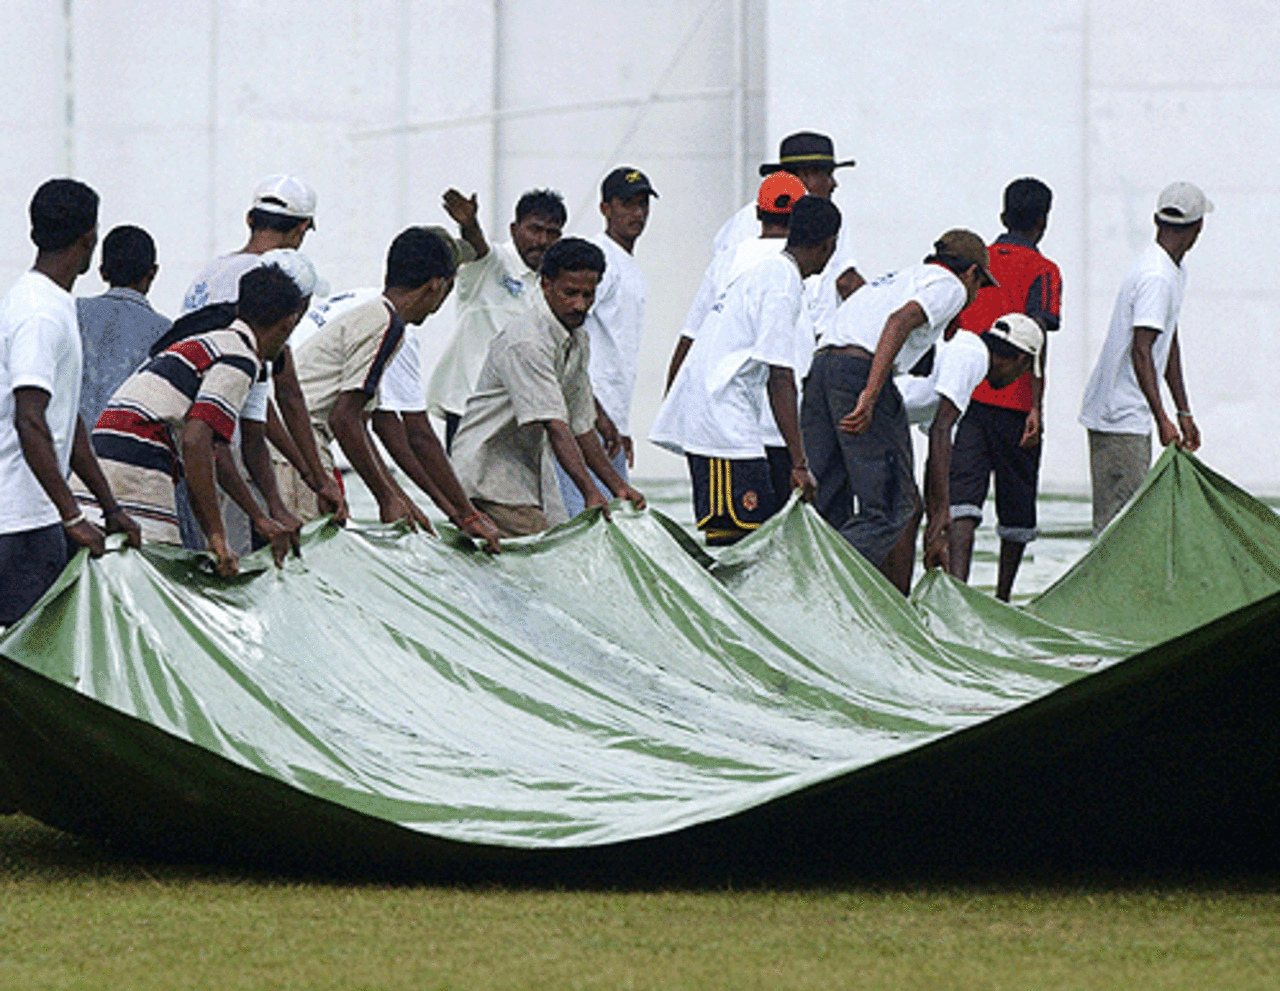 Sri Lankan ground staff pull over the covers to protect the pitch from a sudden downpour of rain prior to the start of the third day of the second and final Test match, Sri Lanka v West Indies, Kandy, July 24 2005